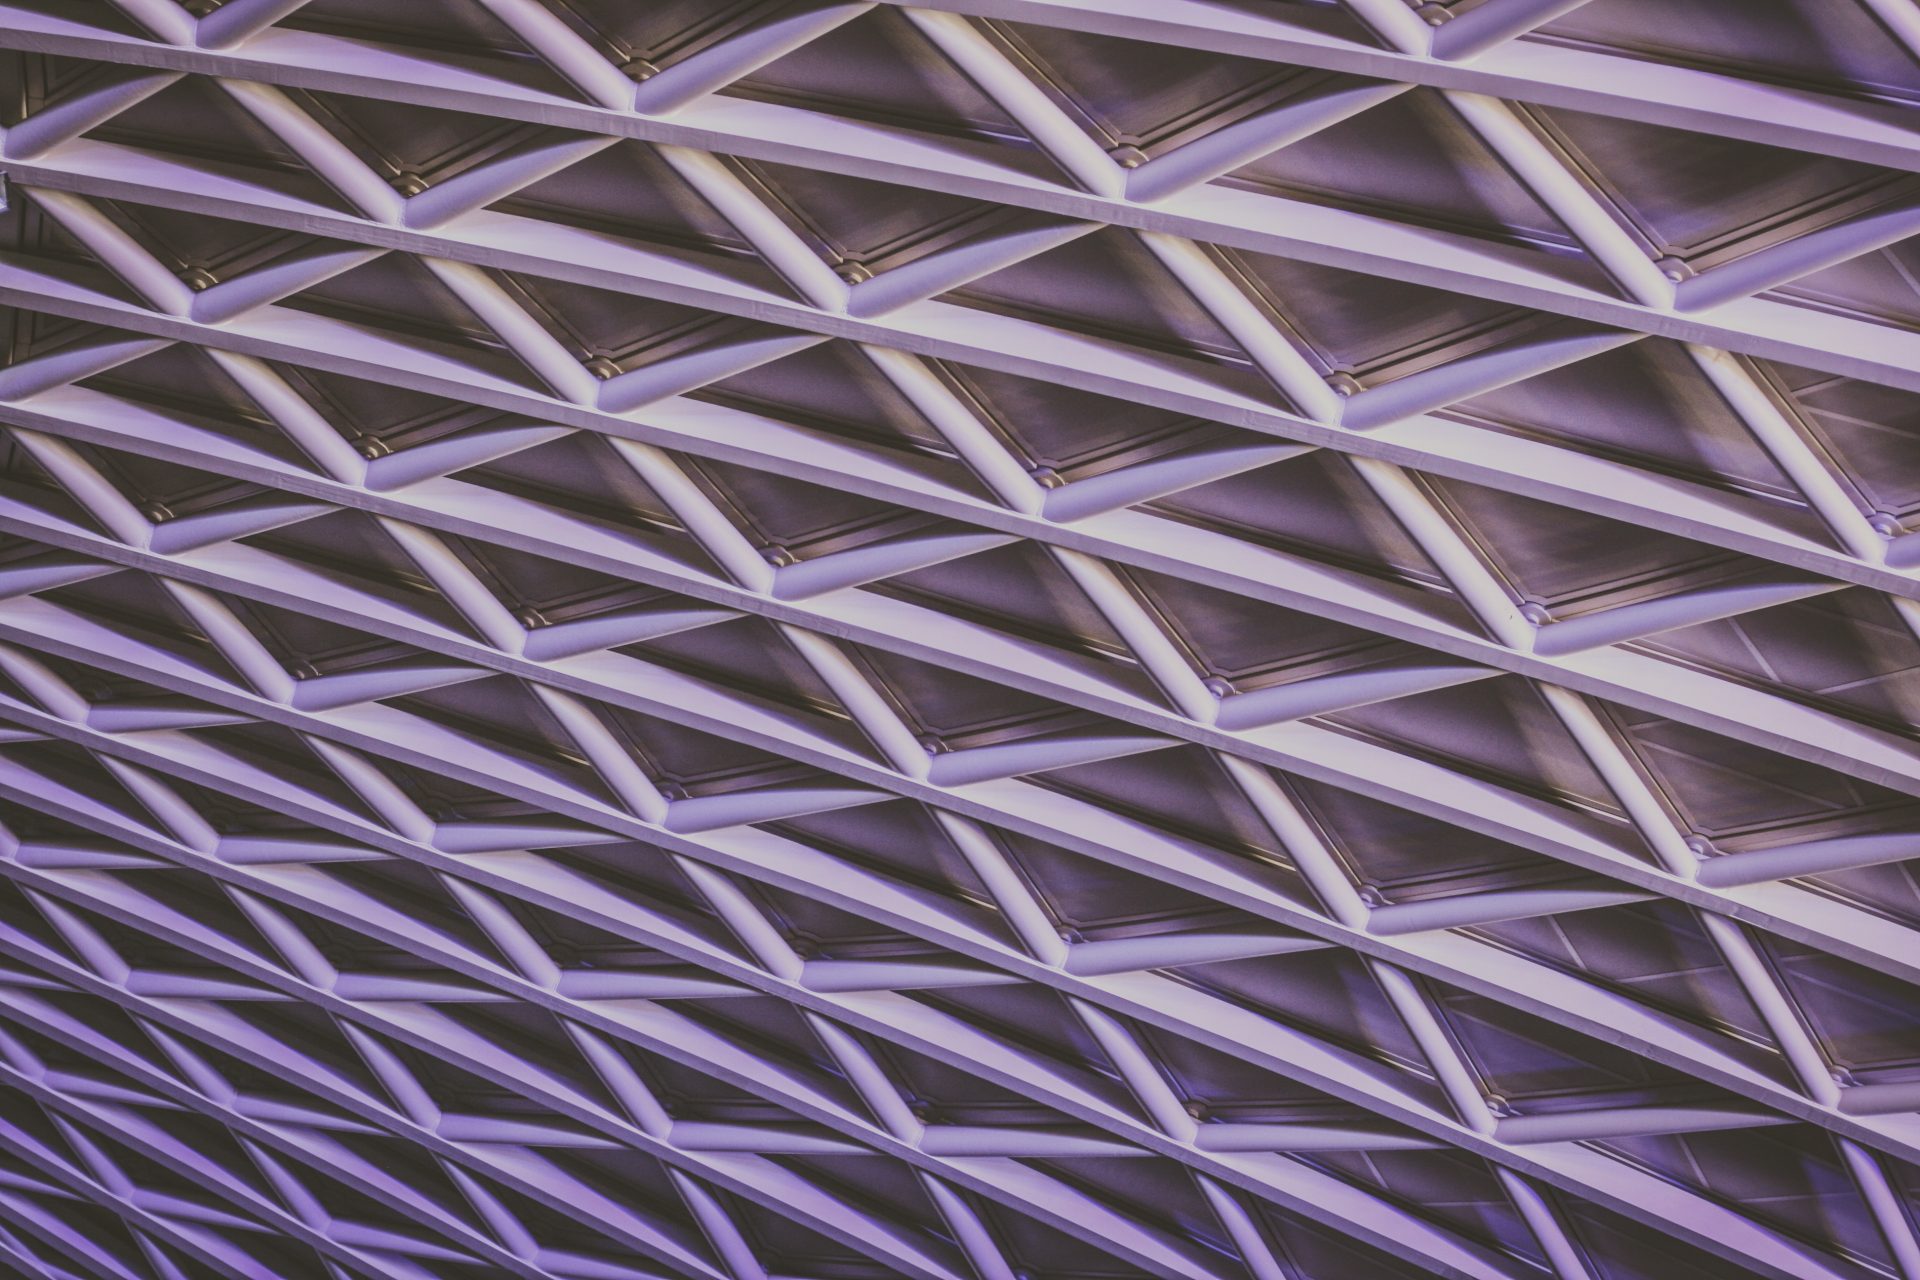 A structure made up of a symmetrical lattice of triangular components